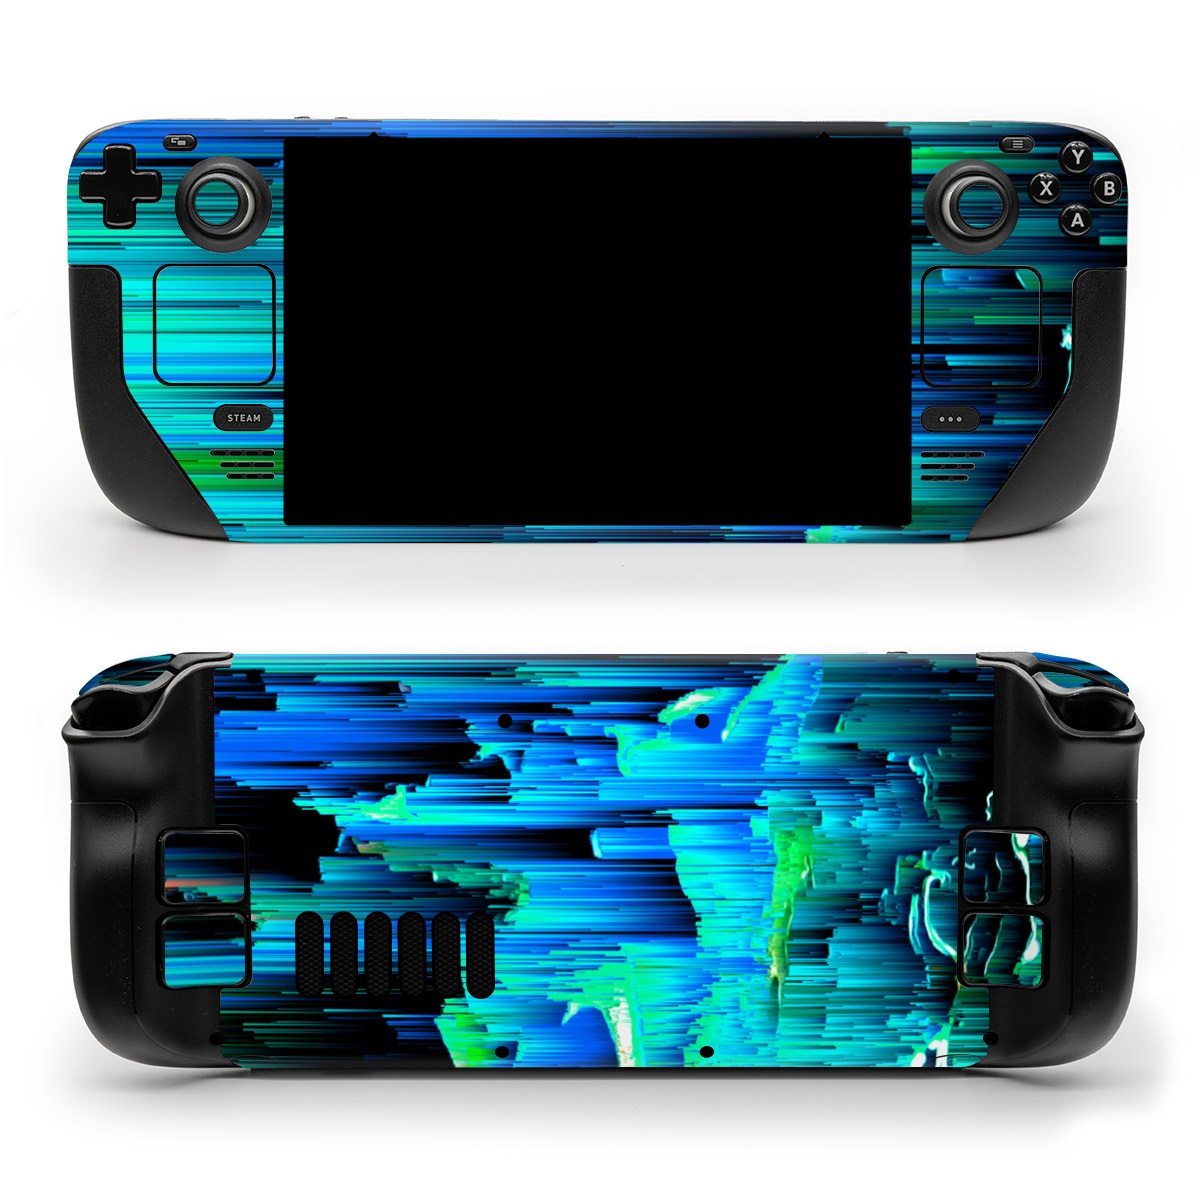 Valve Steam Deck Skin design of Blue, Green, Turquoise, Light, Colorfulness, Electric blue, with blue, green, black, white colors